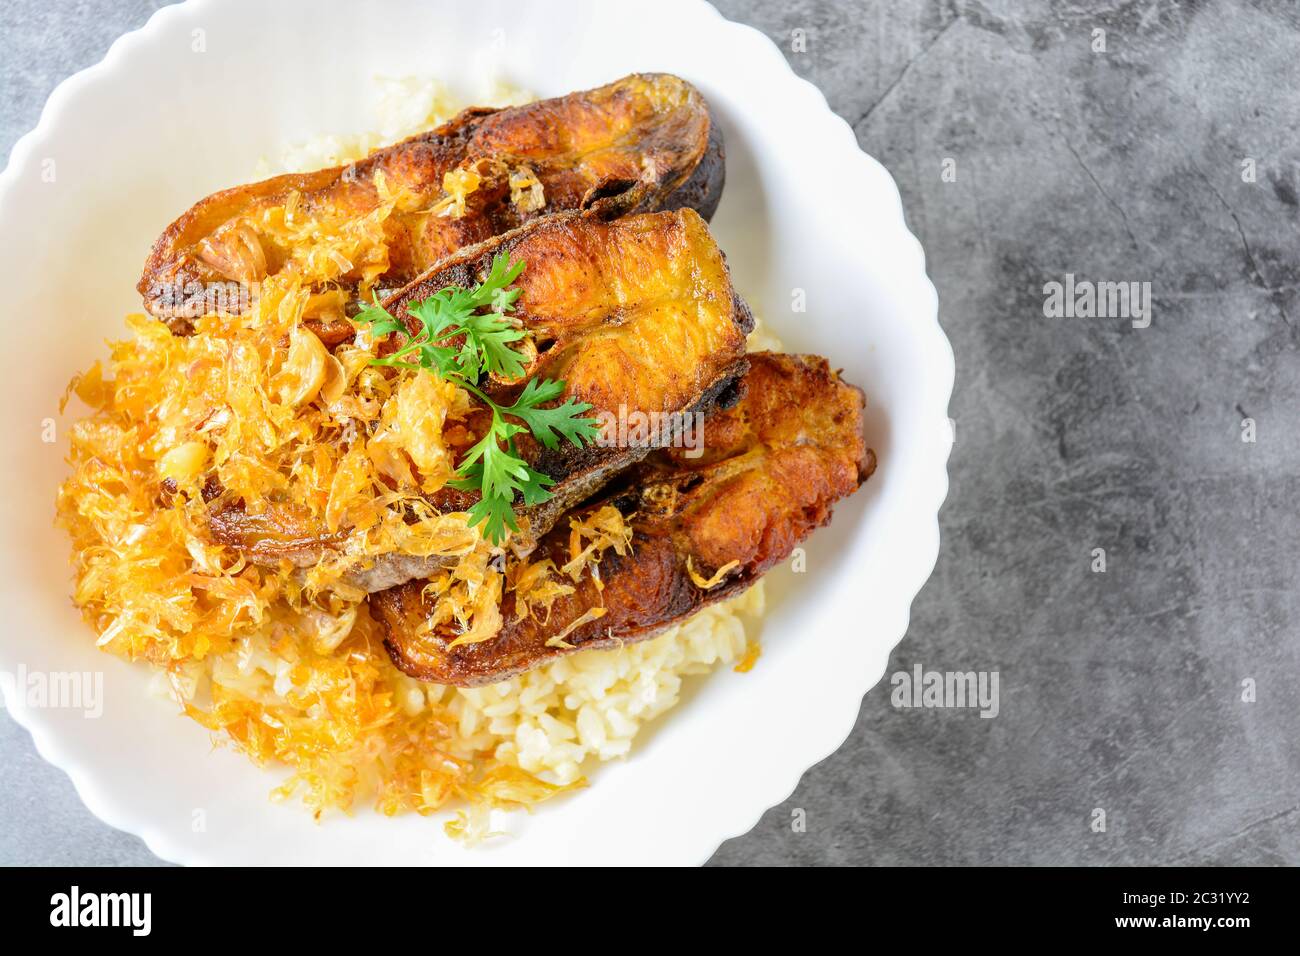 Deep fried sliced Pangasius fish with garlic, served with brown rice. Stock Photo